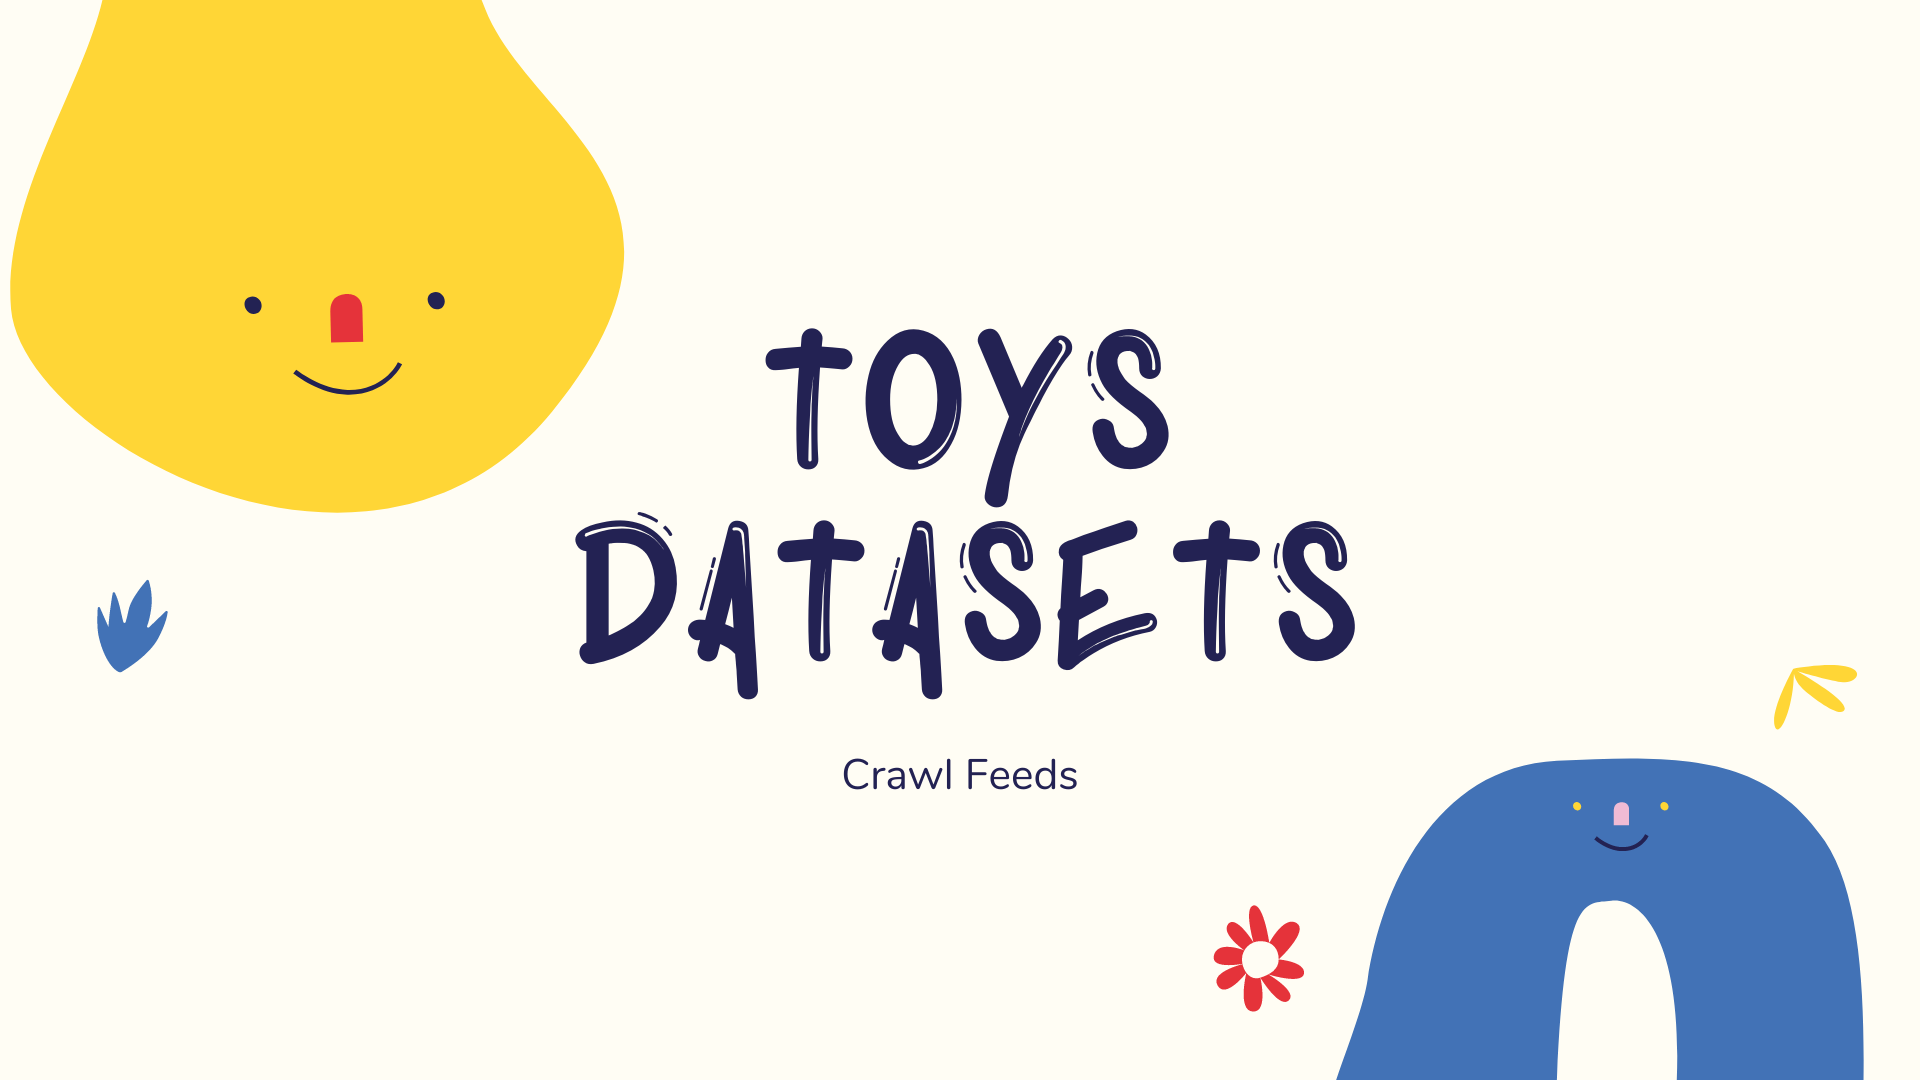 Toys datasets from crawl feeds